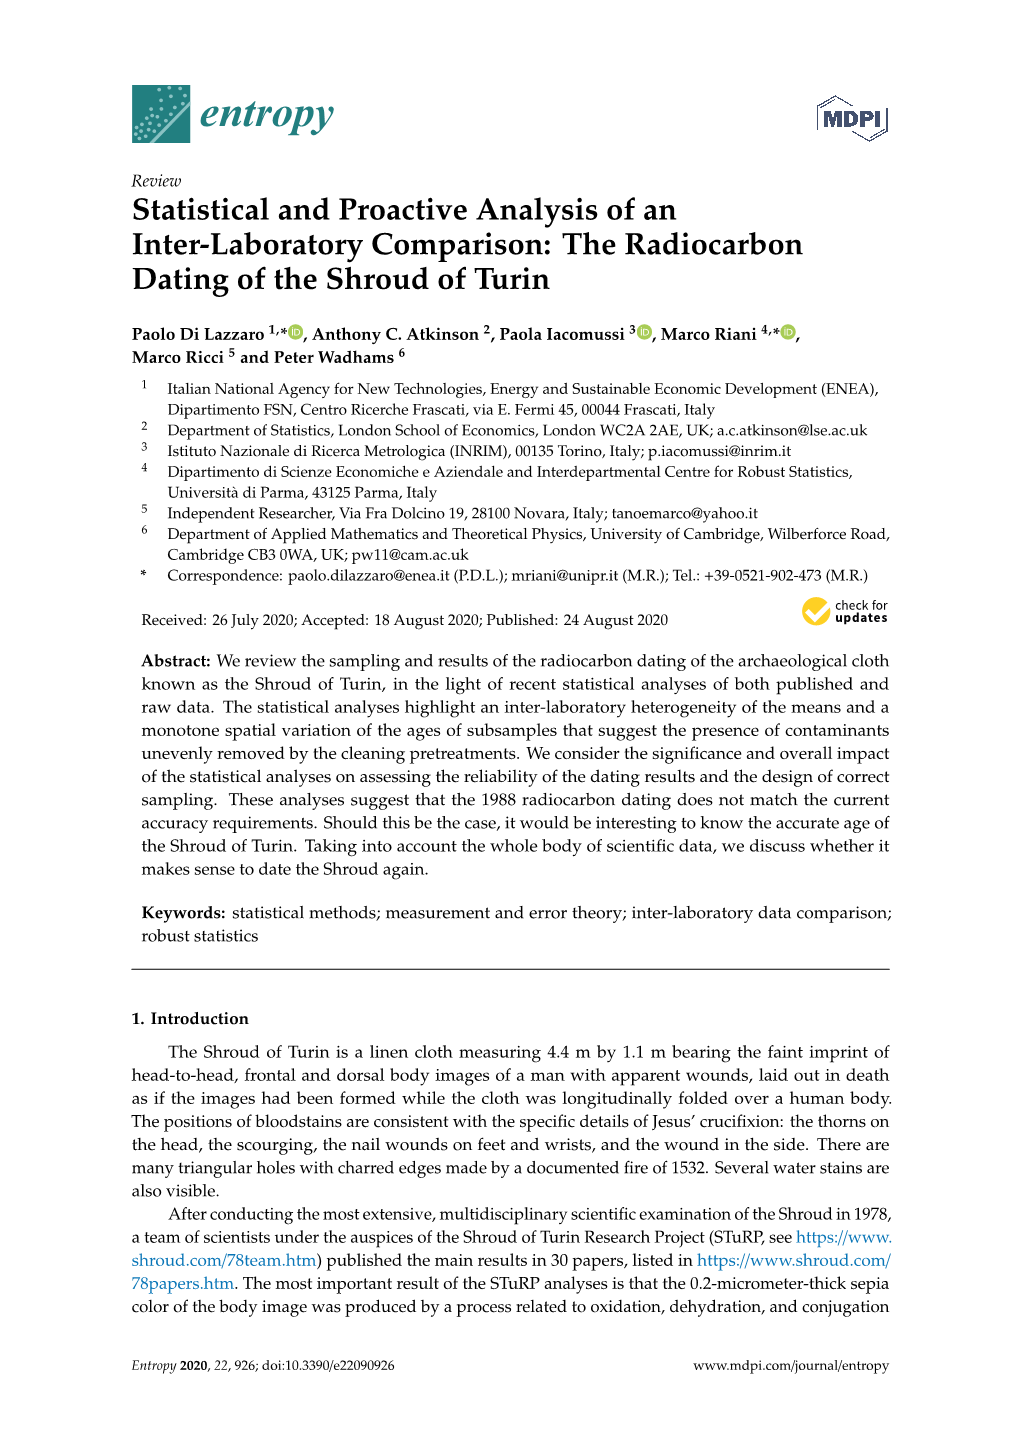 Statistical and Proactive Analysis of an Inter-Laboratory Comparison: the Radiocarbon Dating of the Shroud of Turin